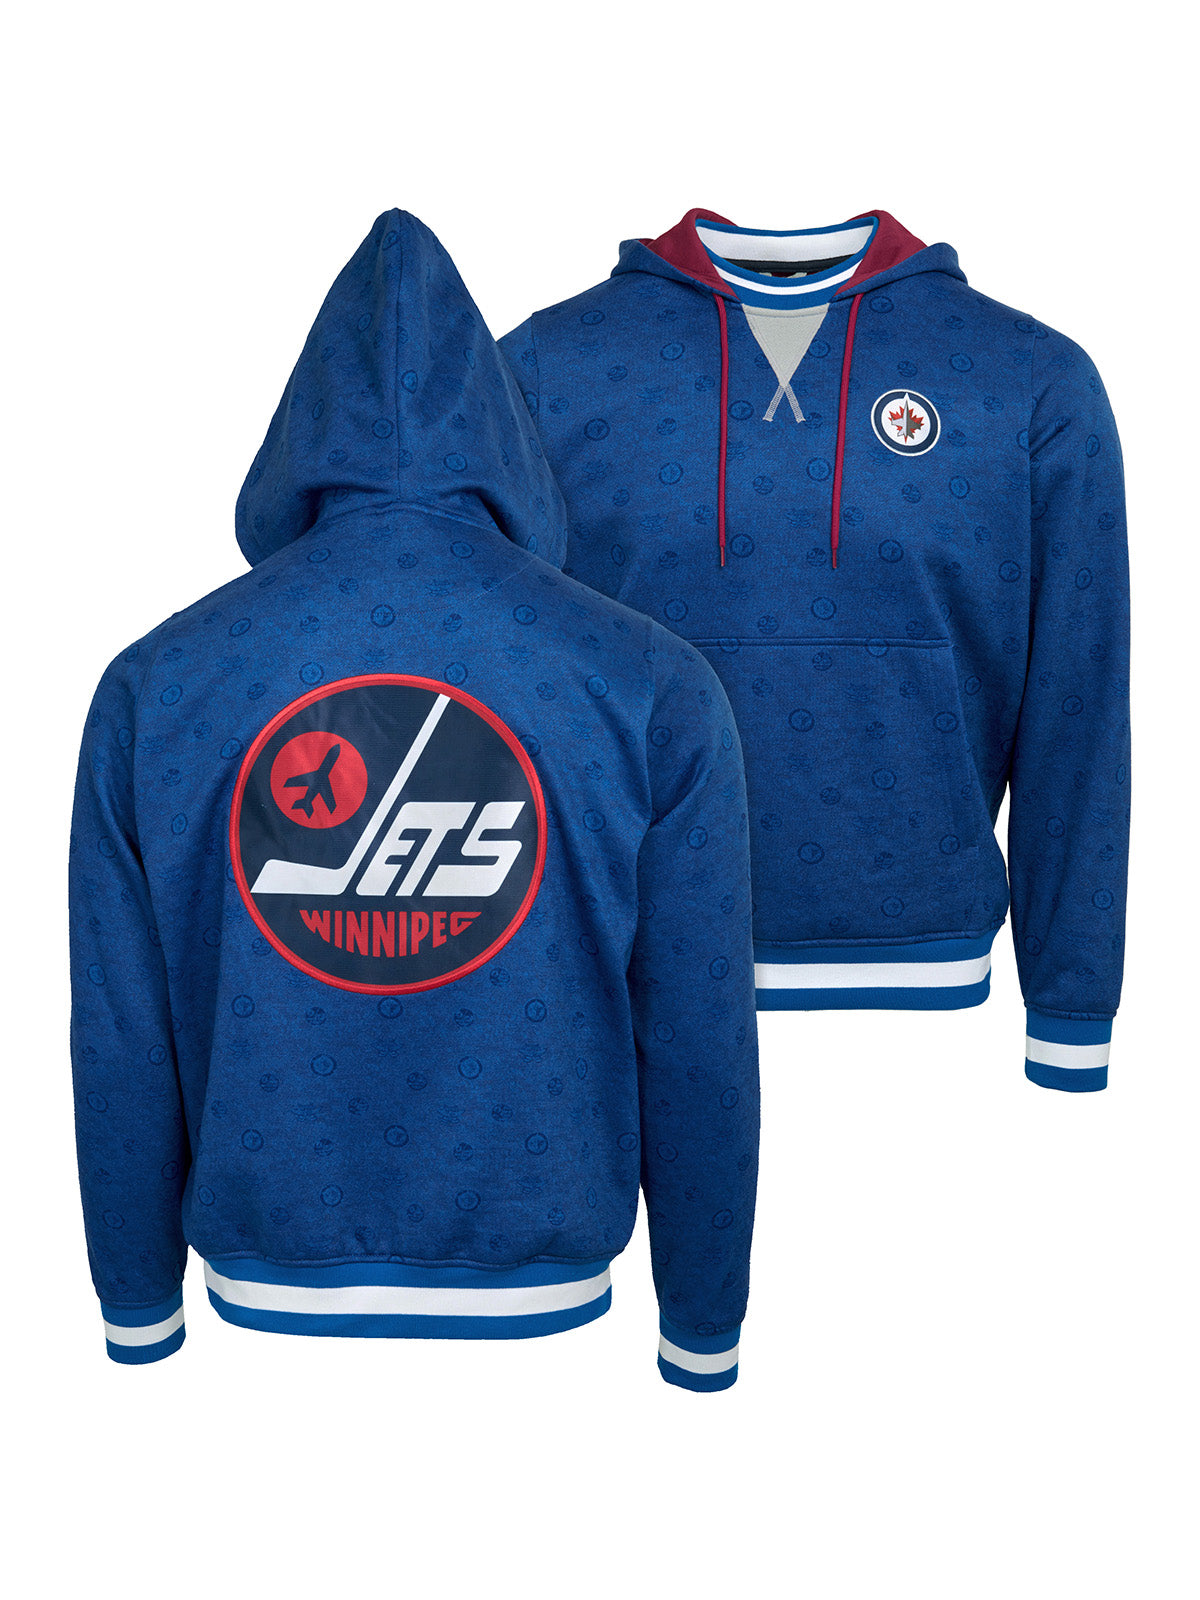 Winnipeg Jets Hoodie - Show your team spirit, with the iconic team logo patch on the front and back, and proudly display your Winnipeg Jets support in their team colors with this NHL hockey hoodie.